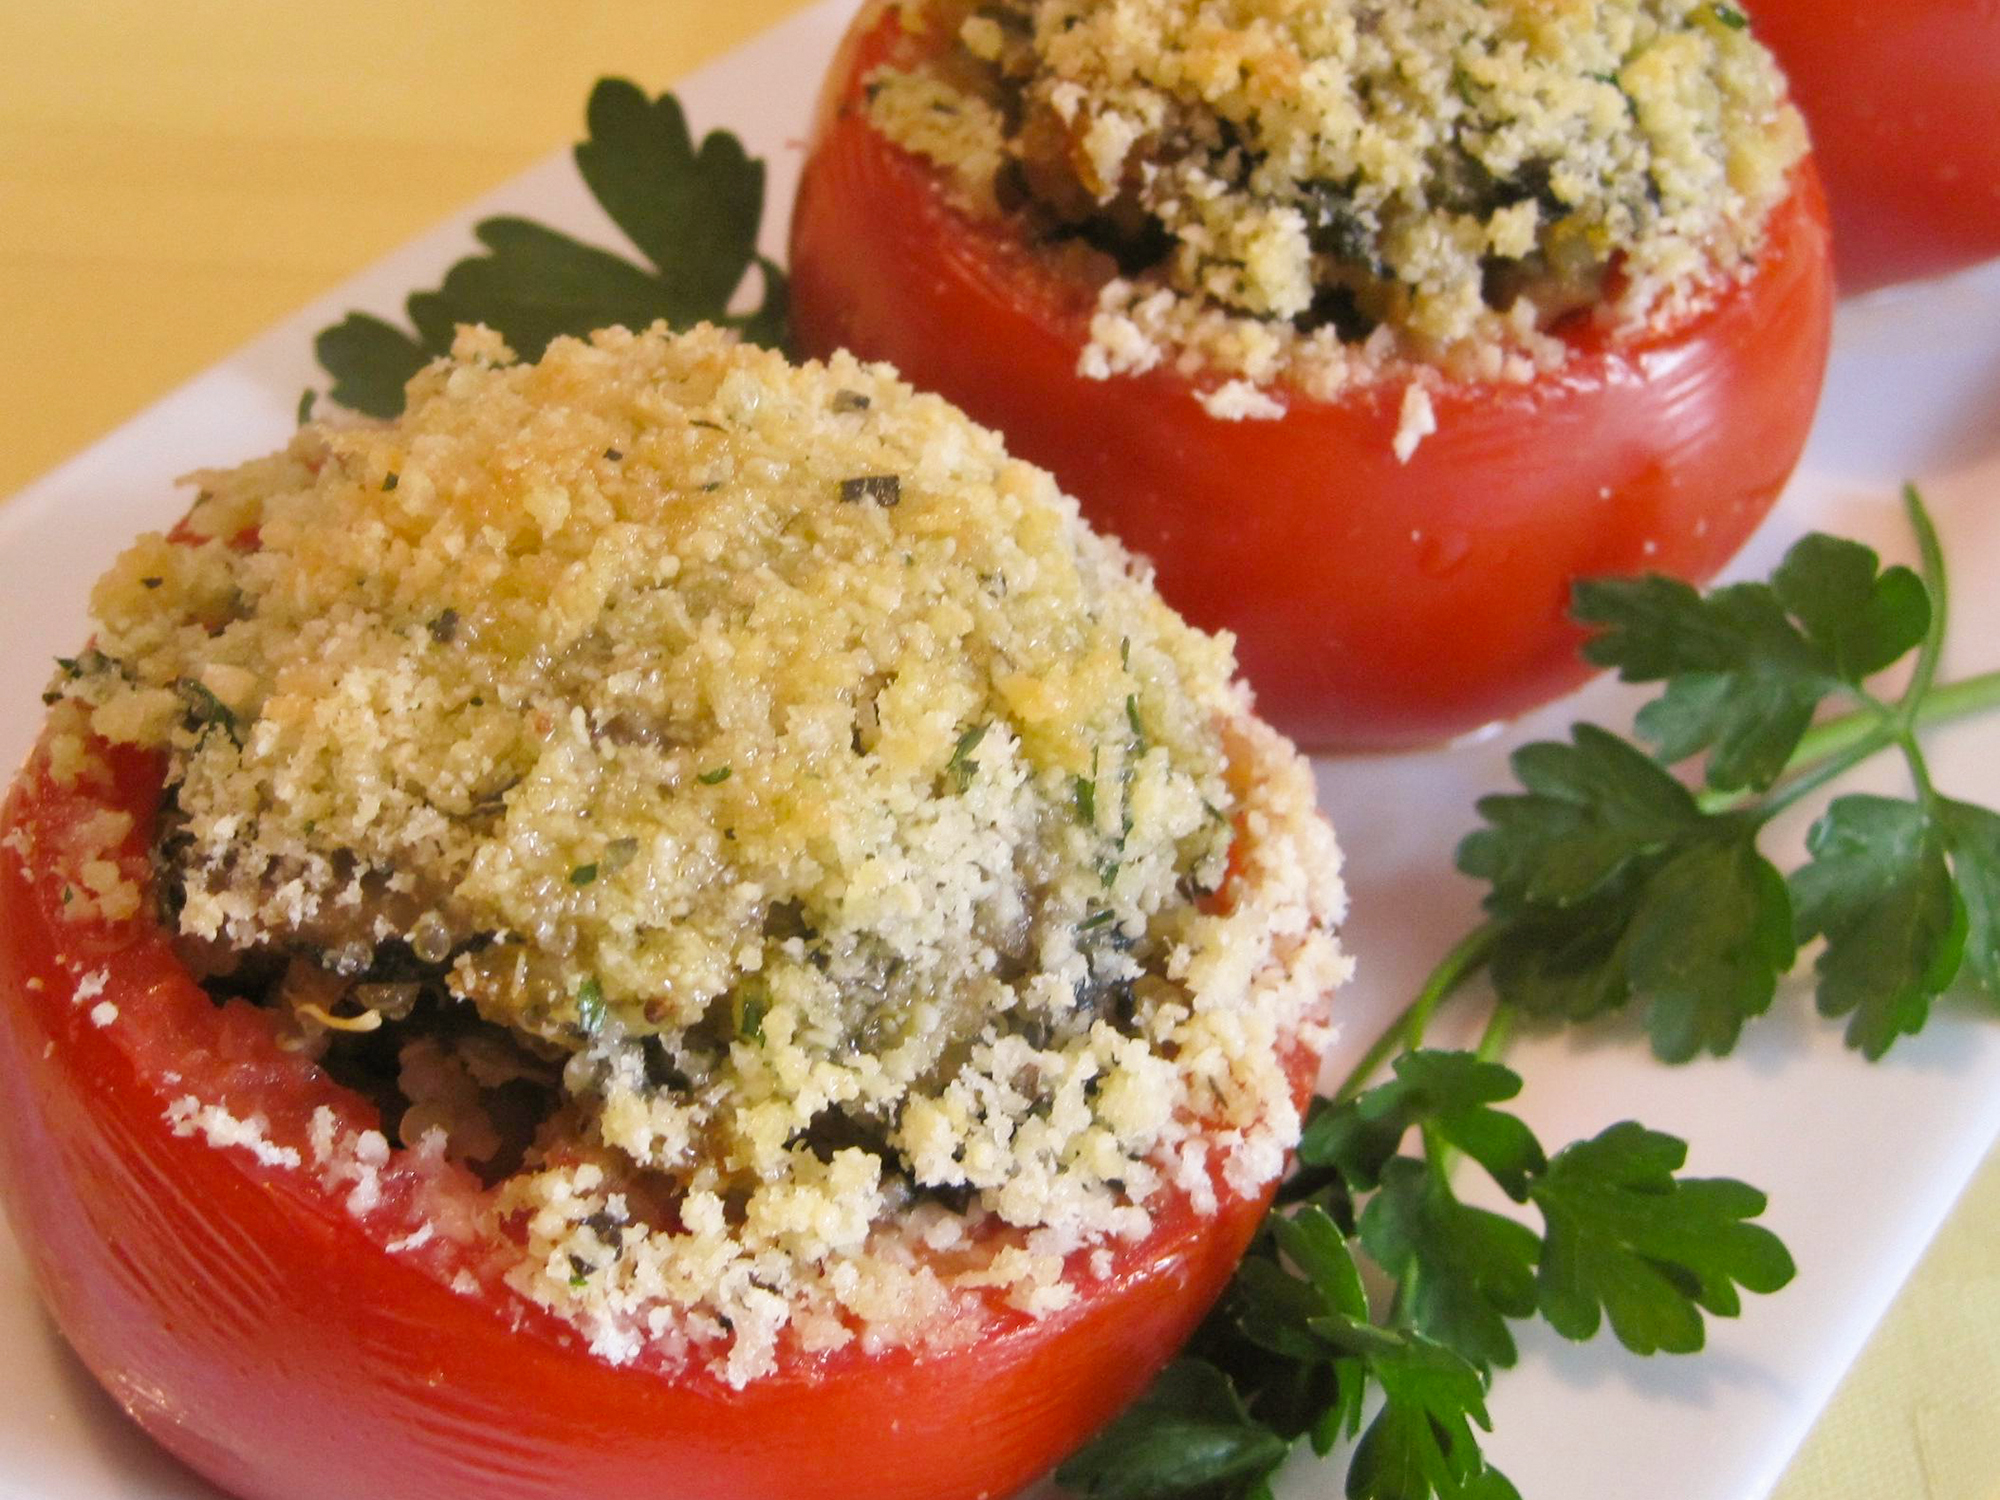 close up view of Baked Stuffed Tomatoes with breadcrumbs on top, garnished with fresh herbs on a white platter